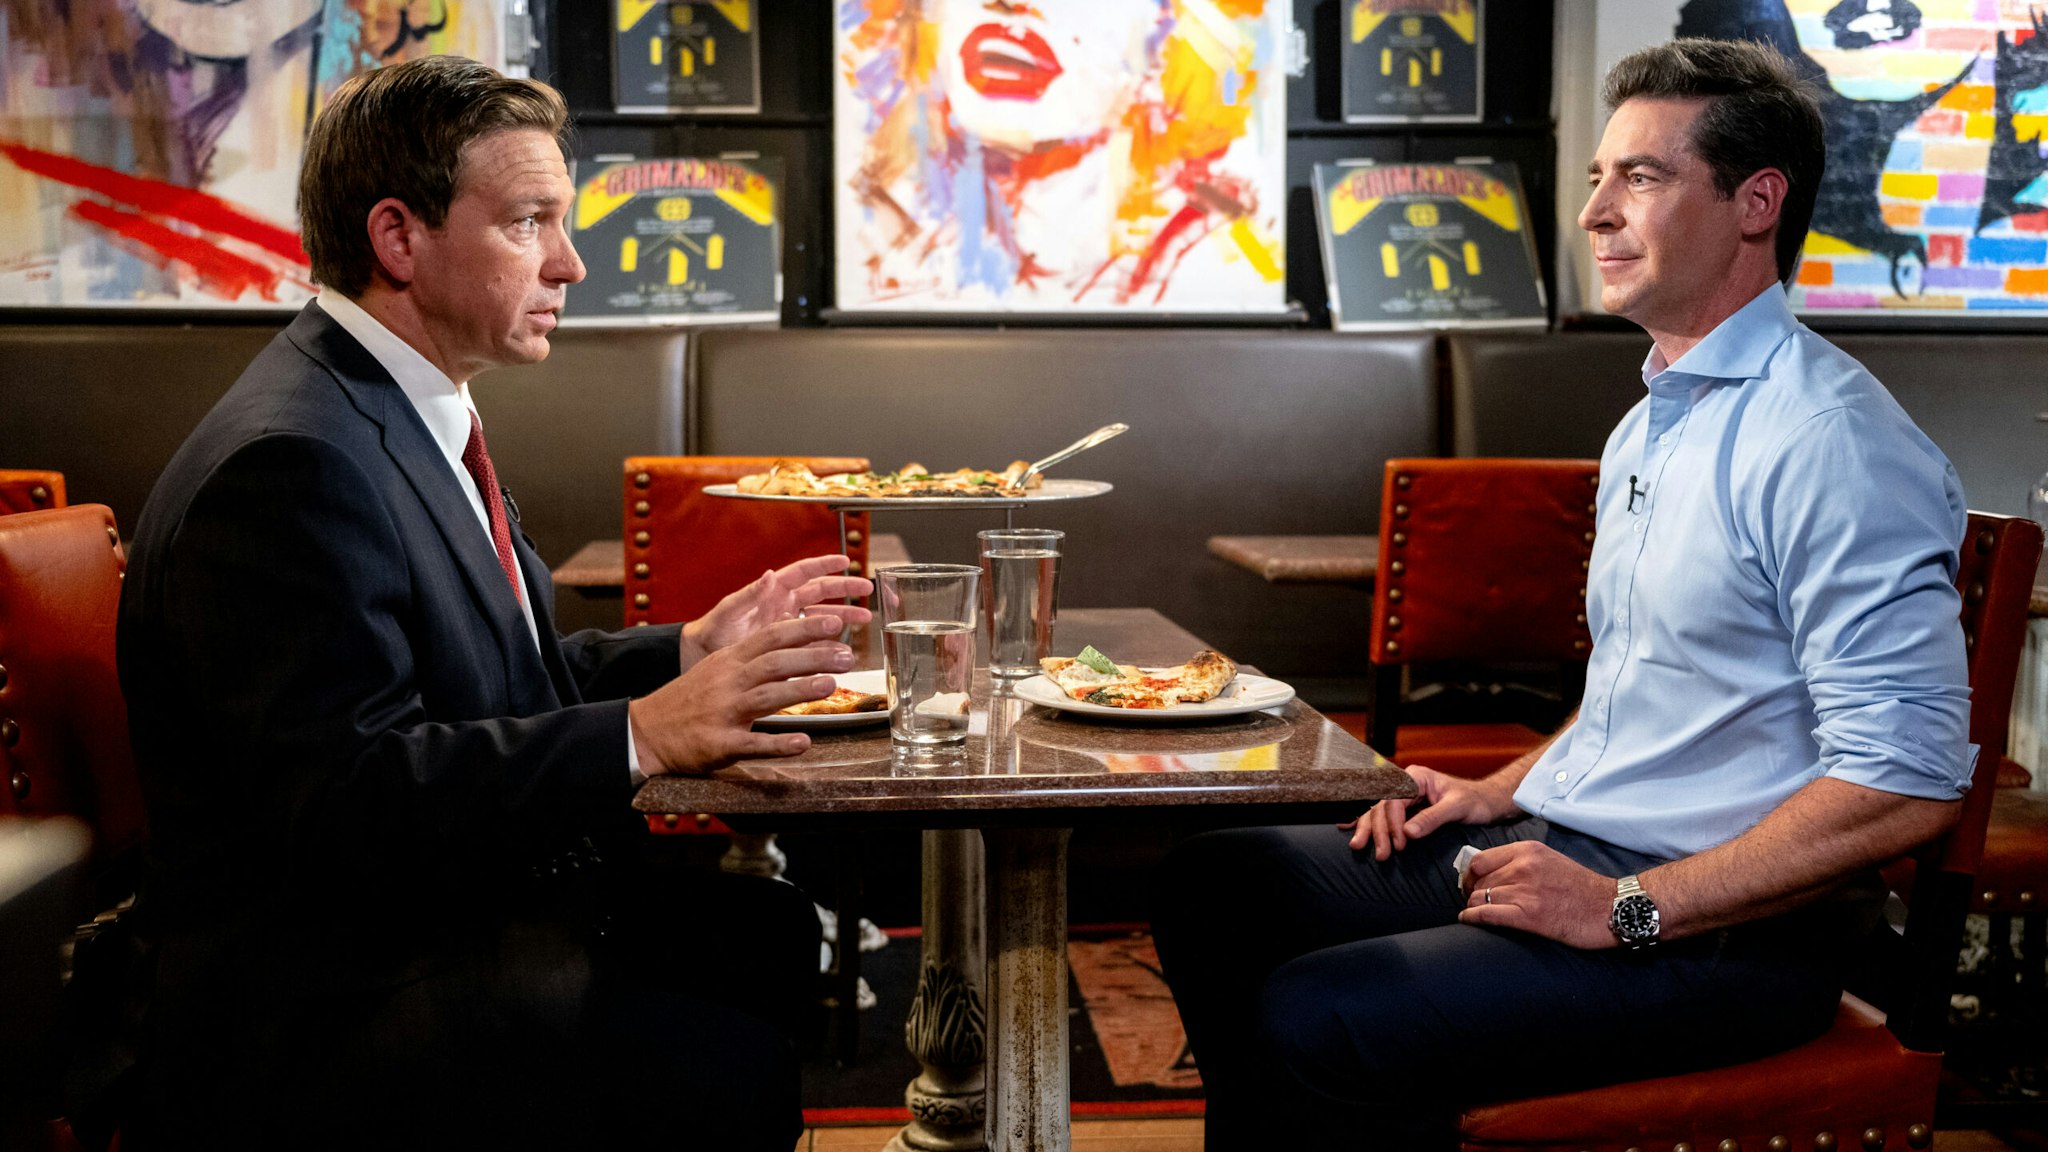 NEW YORK, NEW YORK - JUNE 29: Governor of Florida and presidential candidate Ron DeSantis with host Jesse Watters as he visits "Jesse Watters Primetime" at Grimaldi's Coal Brick-Oven Pizzeria on 6th Avenue in Manhattan on June 29, 2023 in New York City.